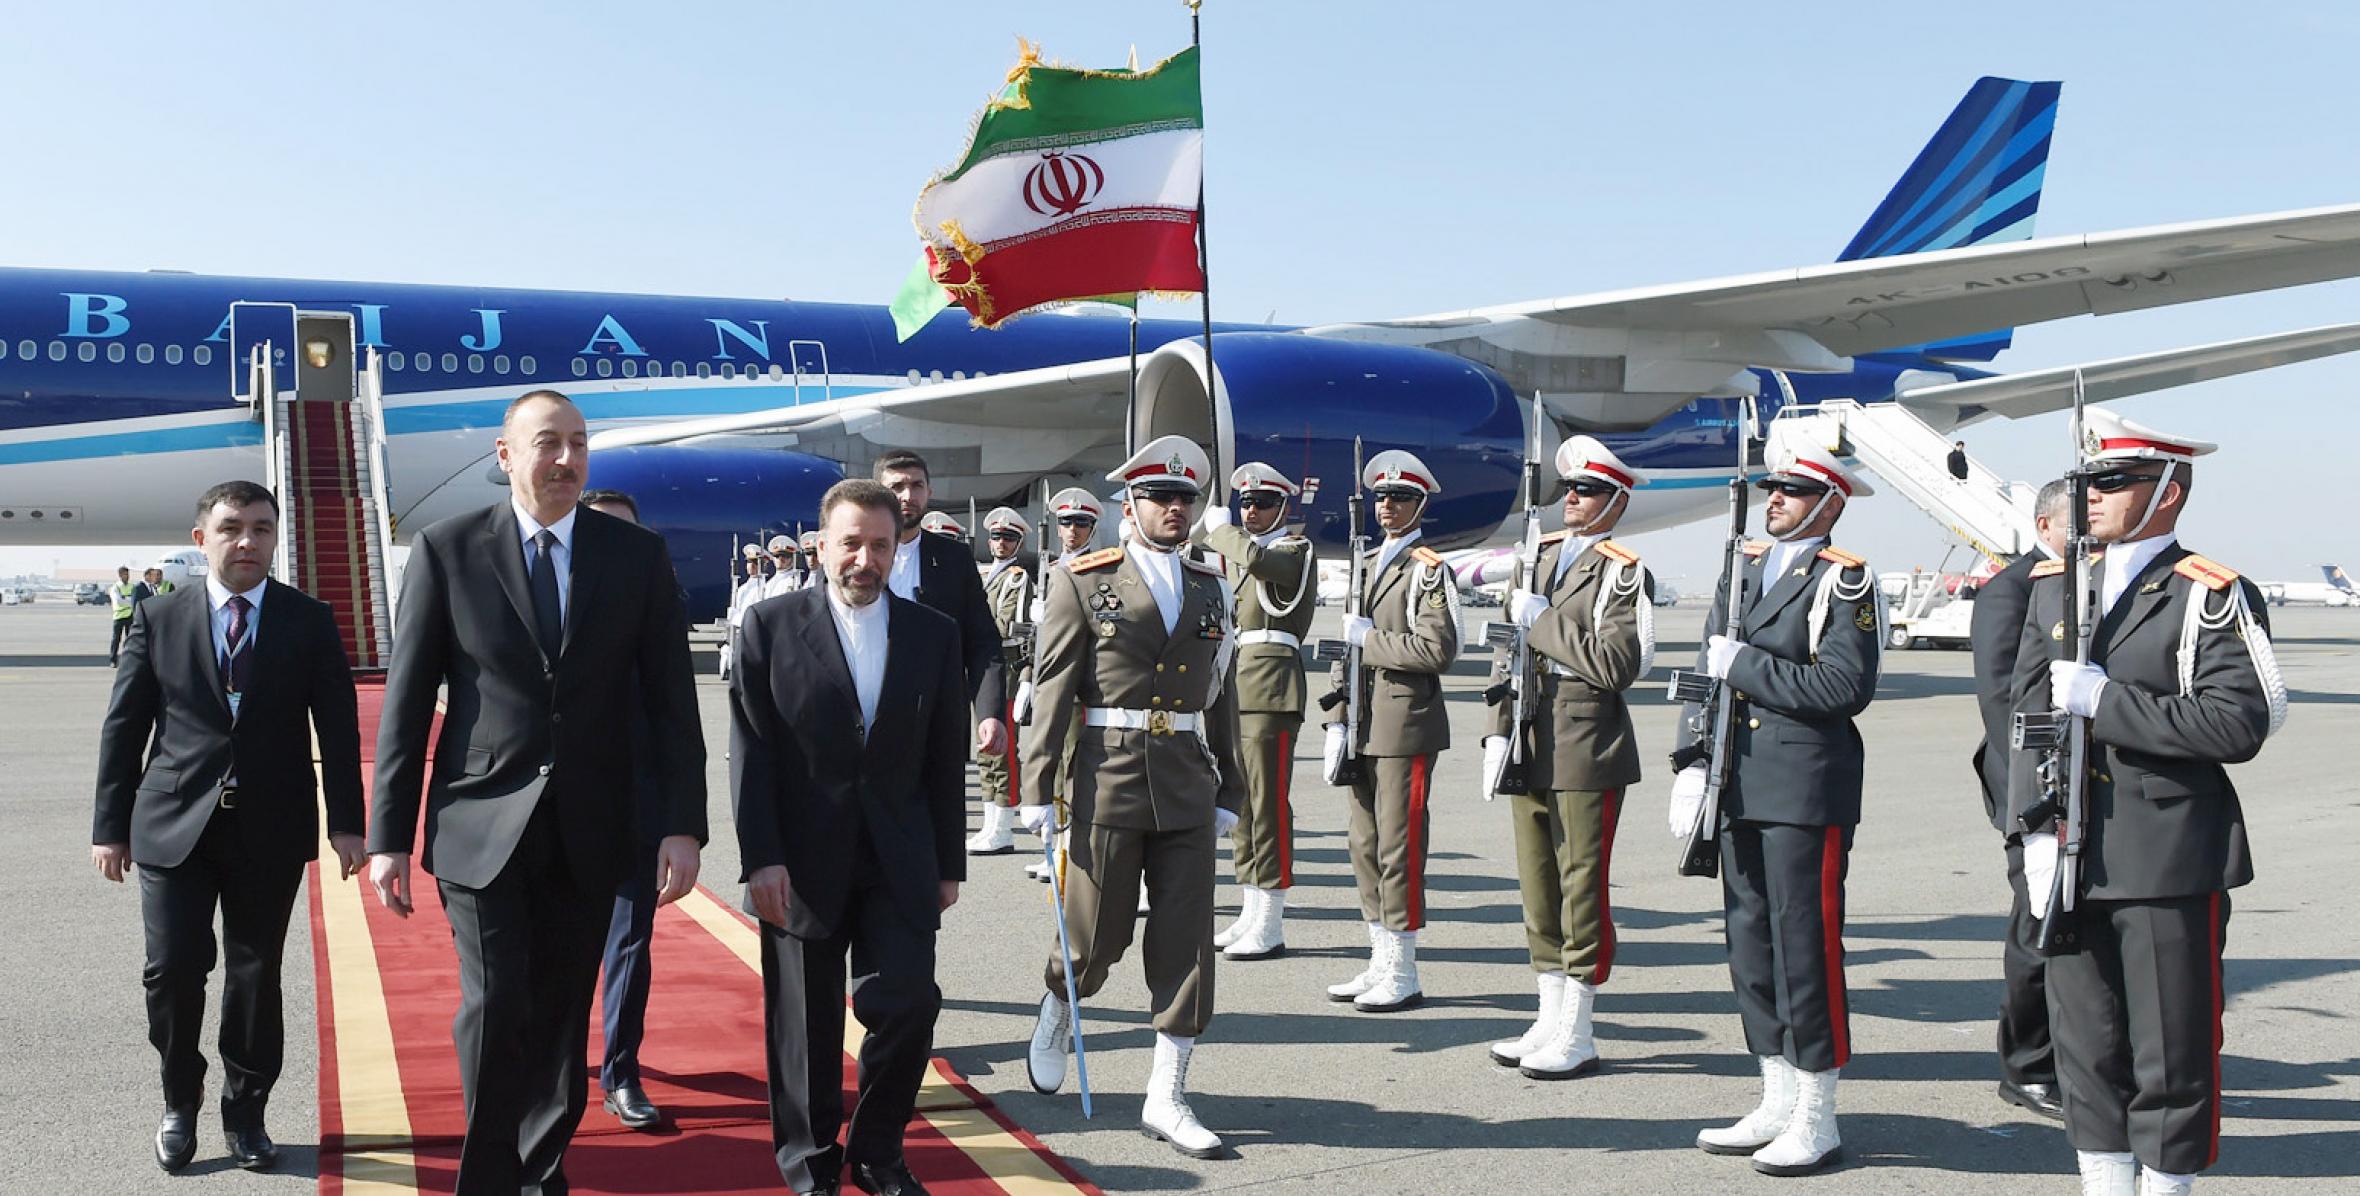 Ilham Aliyev arrived in Iran on official visit